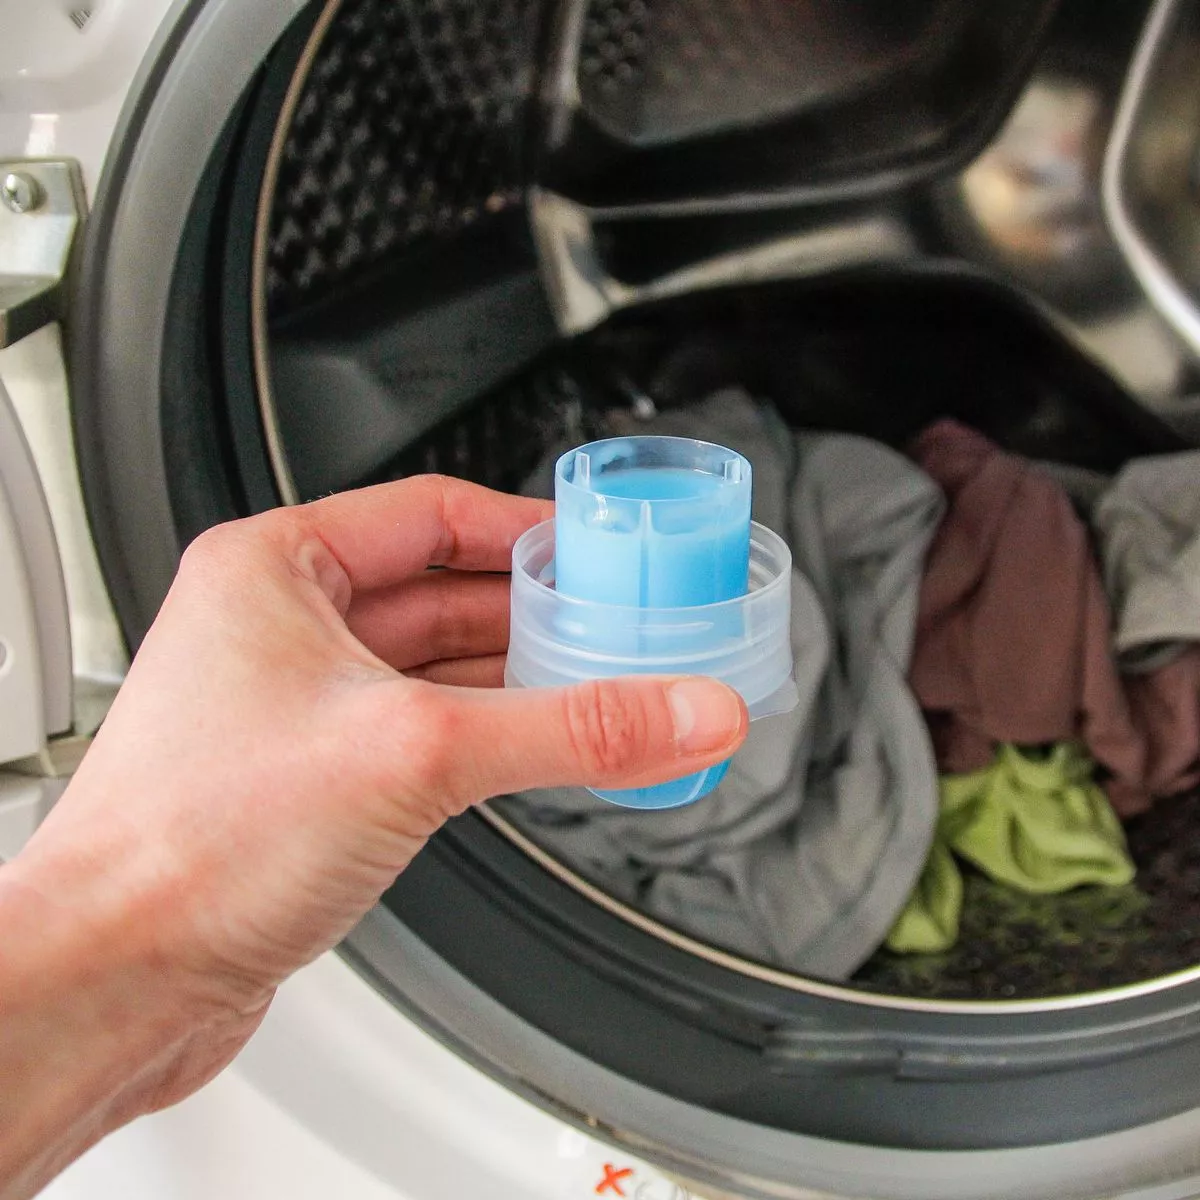 5. Clean the detergent dispenser and filter